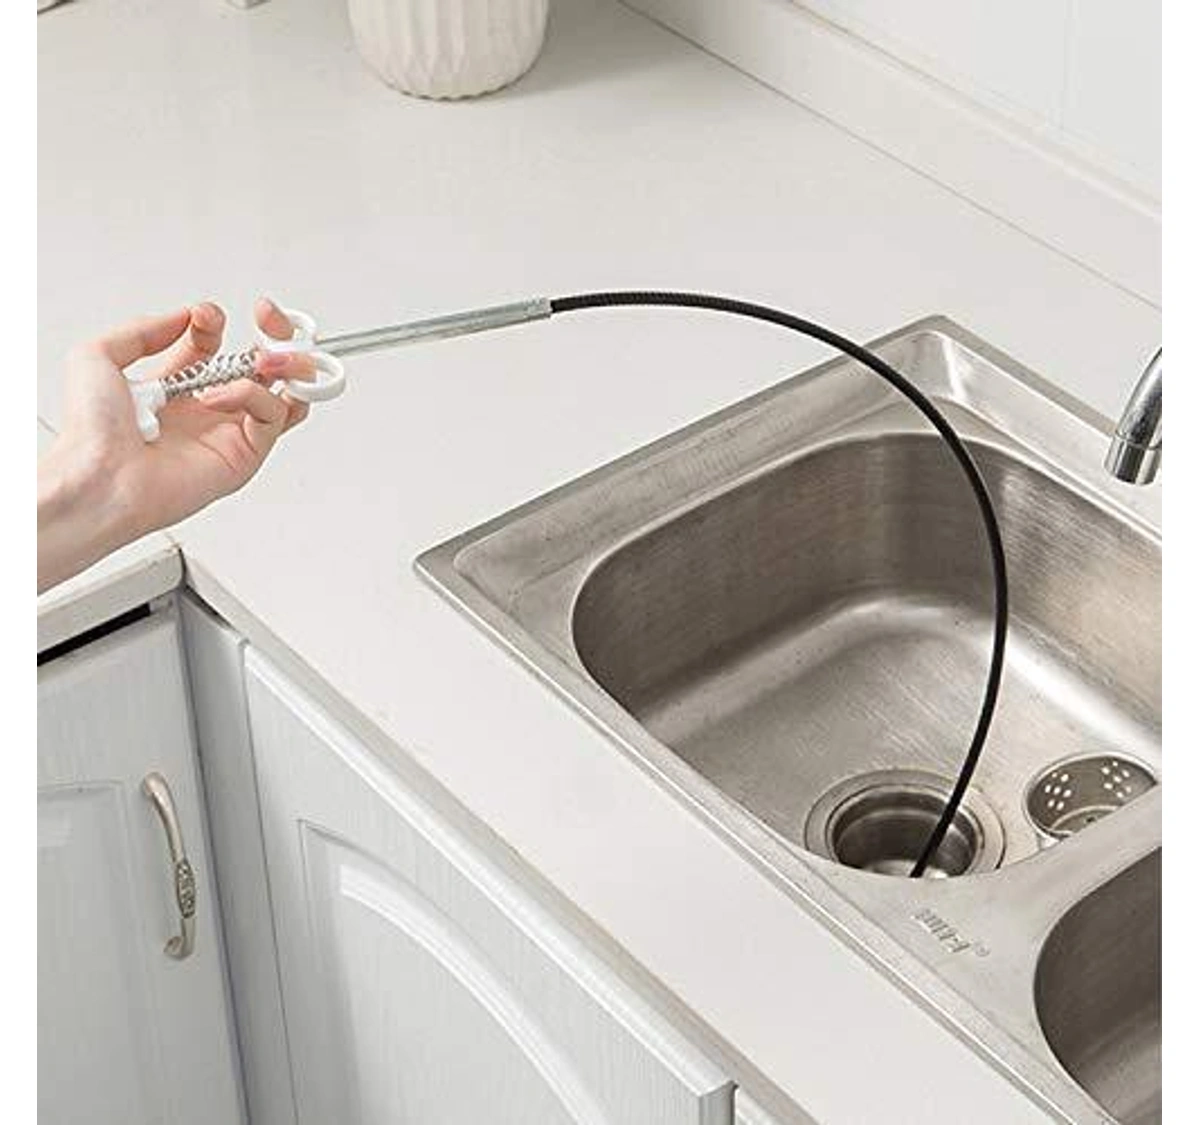 Kitchen Sink Cleaning Hook Cleaner Sticks Clog Remover Sewer Bendable  Dredging Pipe Bathroom Hair Cleaning Sink